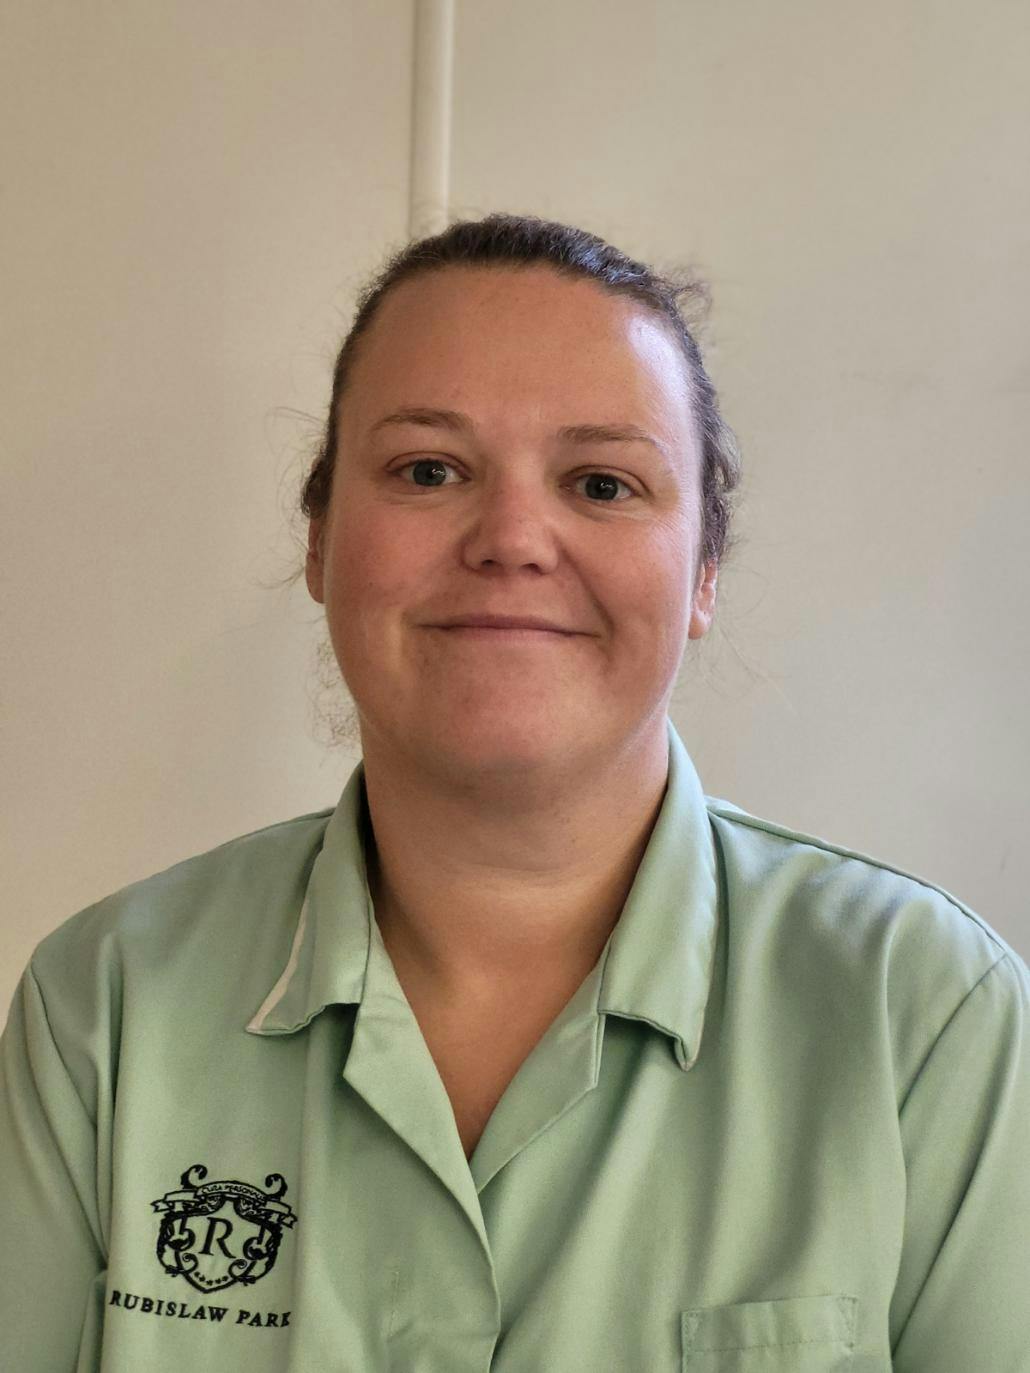 Michelle Housekeeping Manager at Rubislaw Park